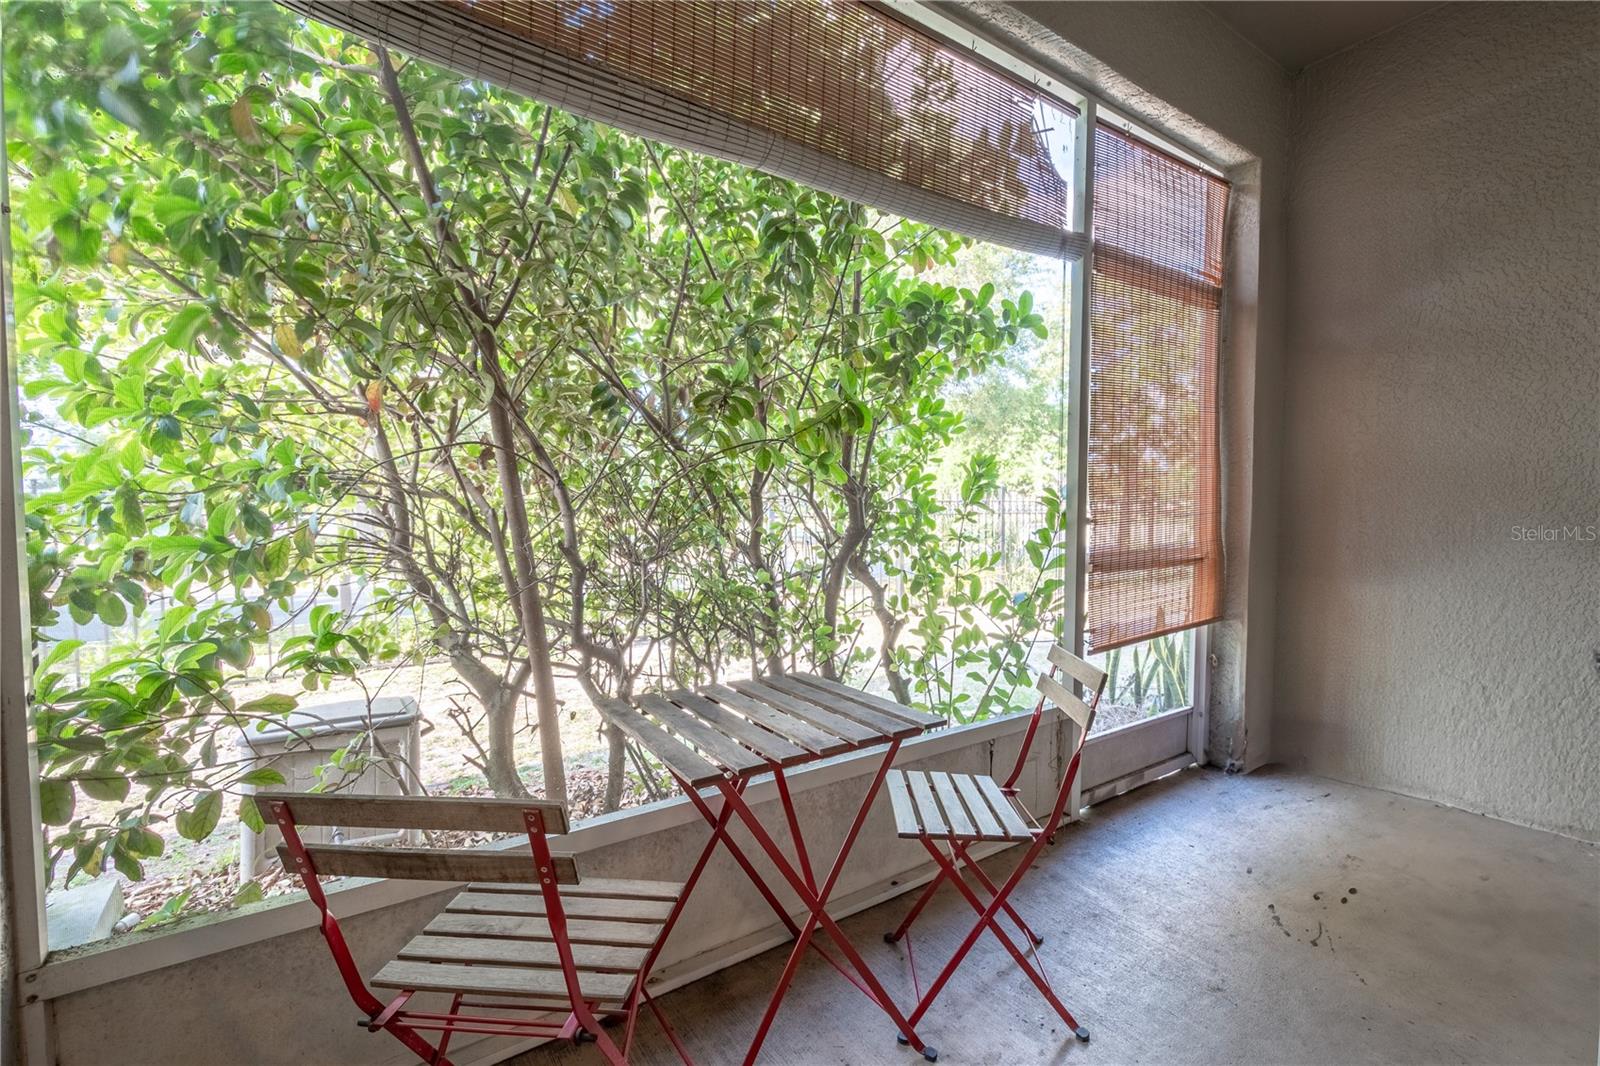 A peaceful and serene screened in back patio, ideal for morning coffee.